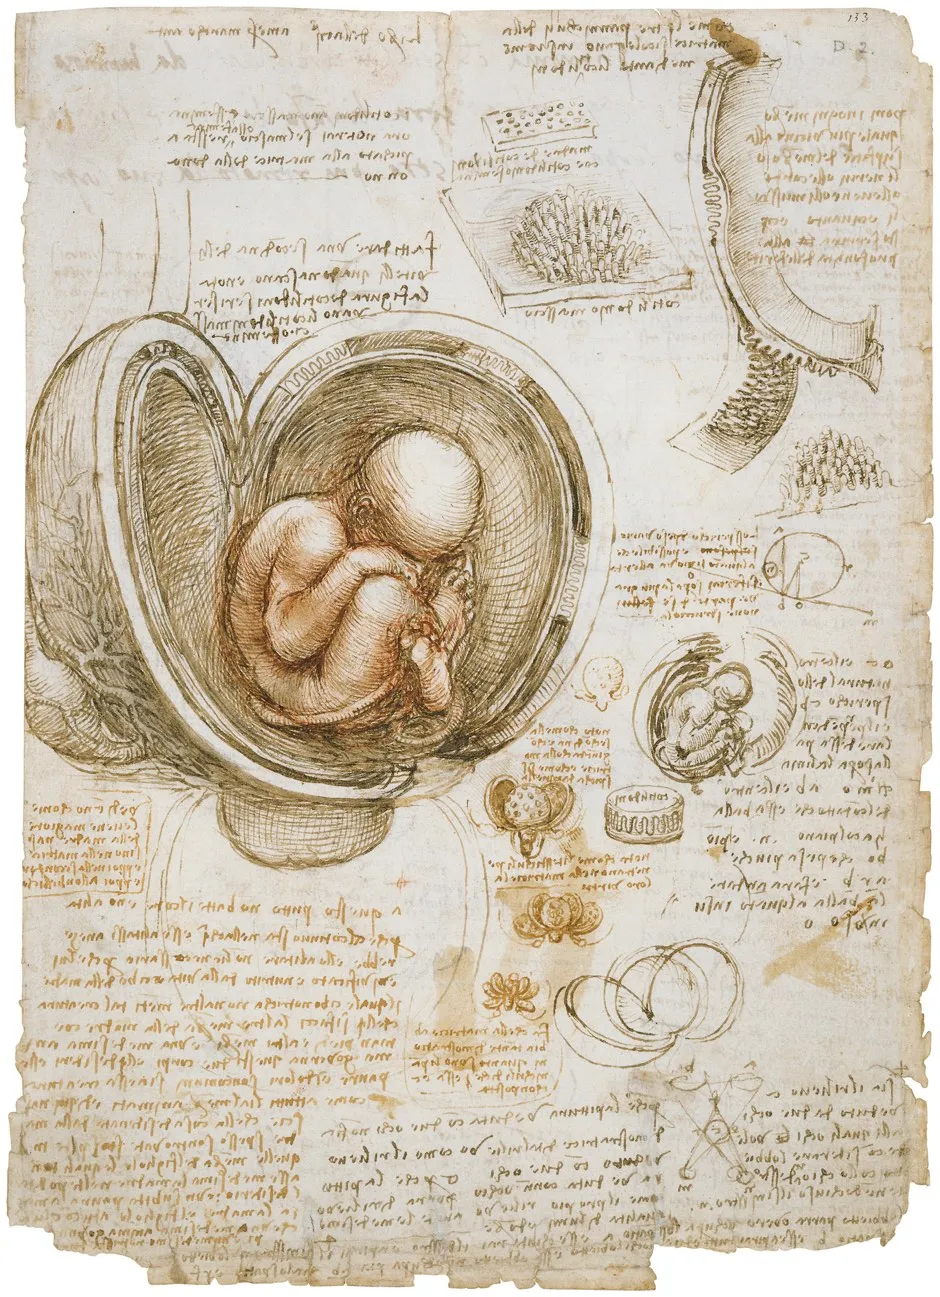 The fetus in the womb, c.1511 (Royal Collection Trust / © Her Majesty Queen Elizabeth II 2019)